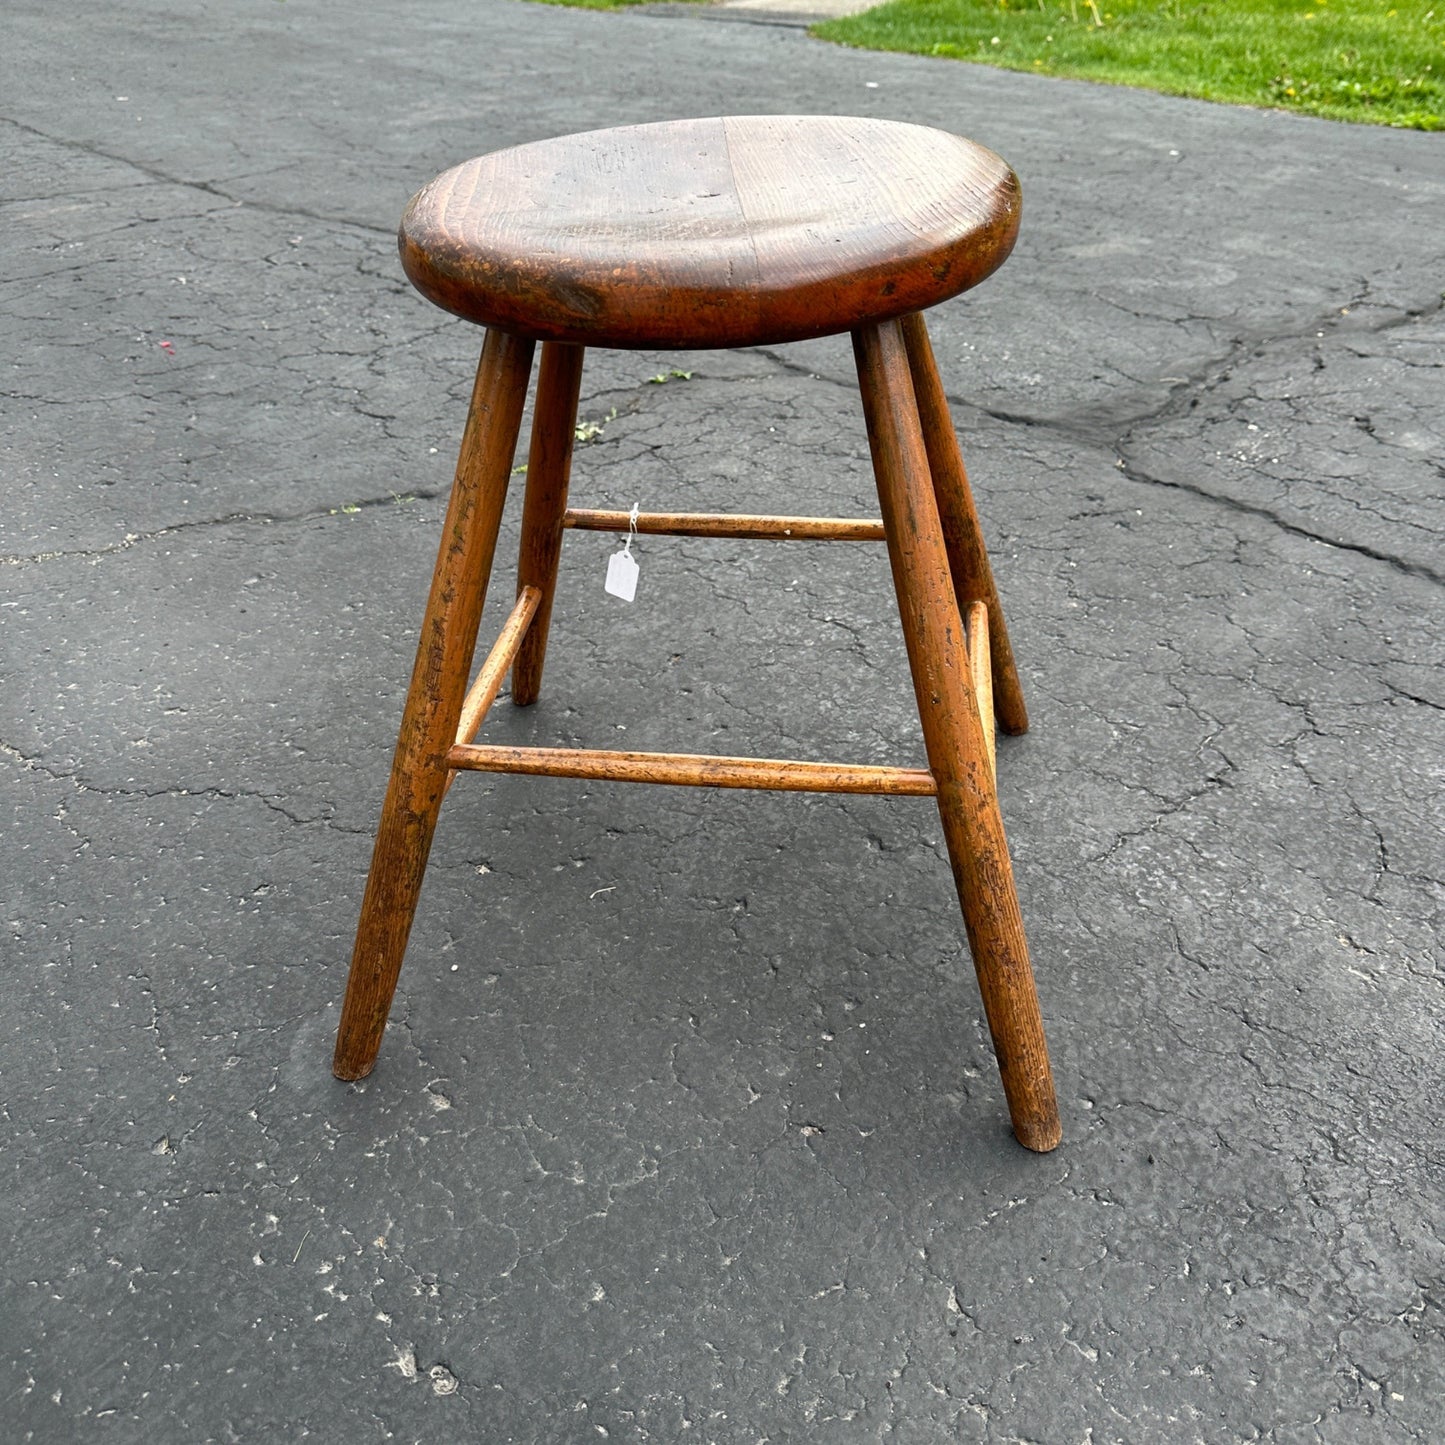 Antique 19th Century Wooden Industrial Drafter's Drafting Stool Chair